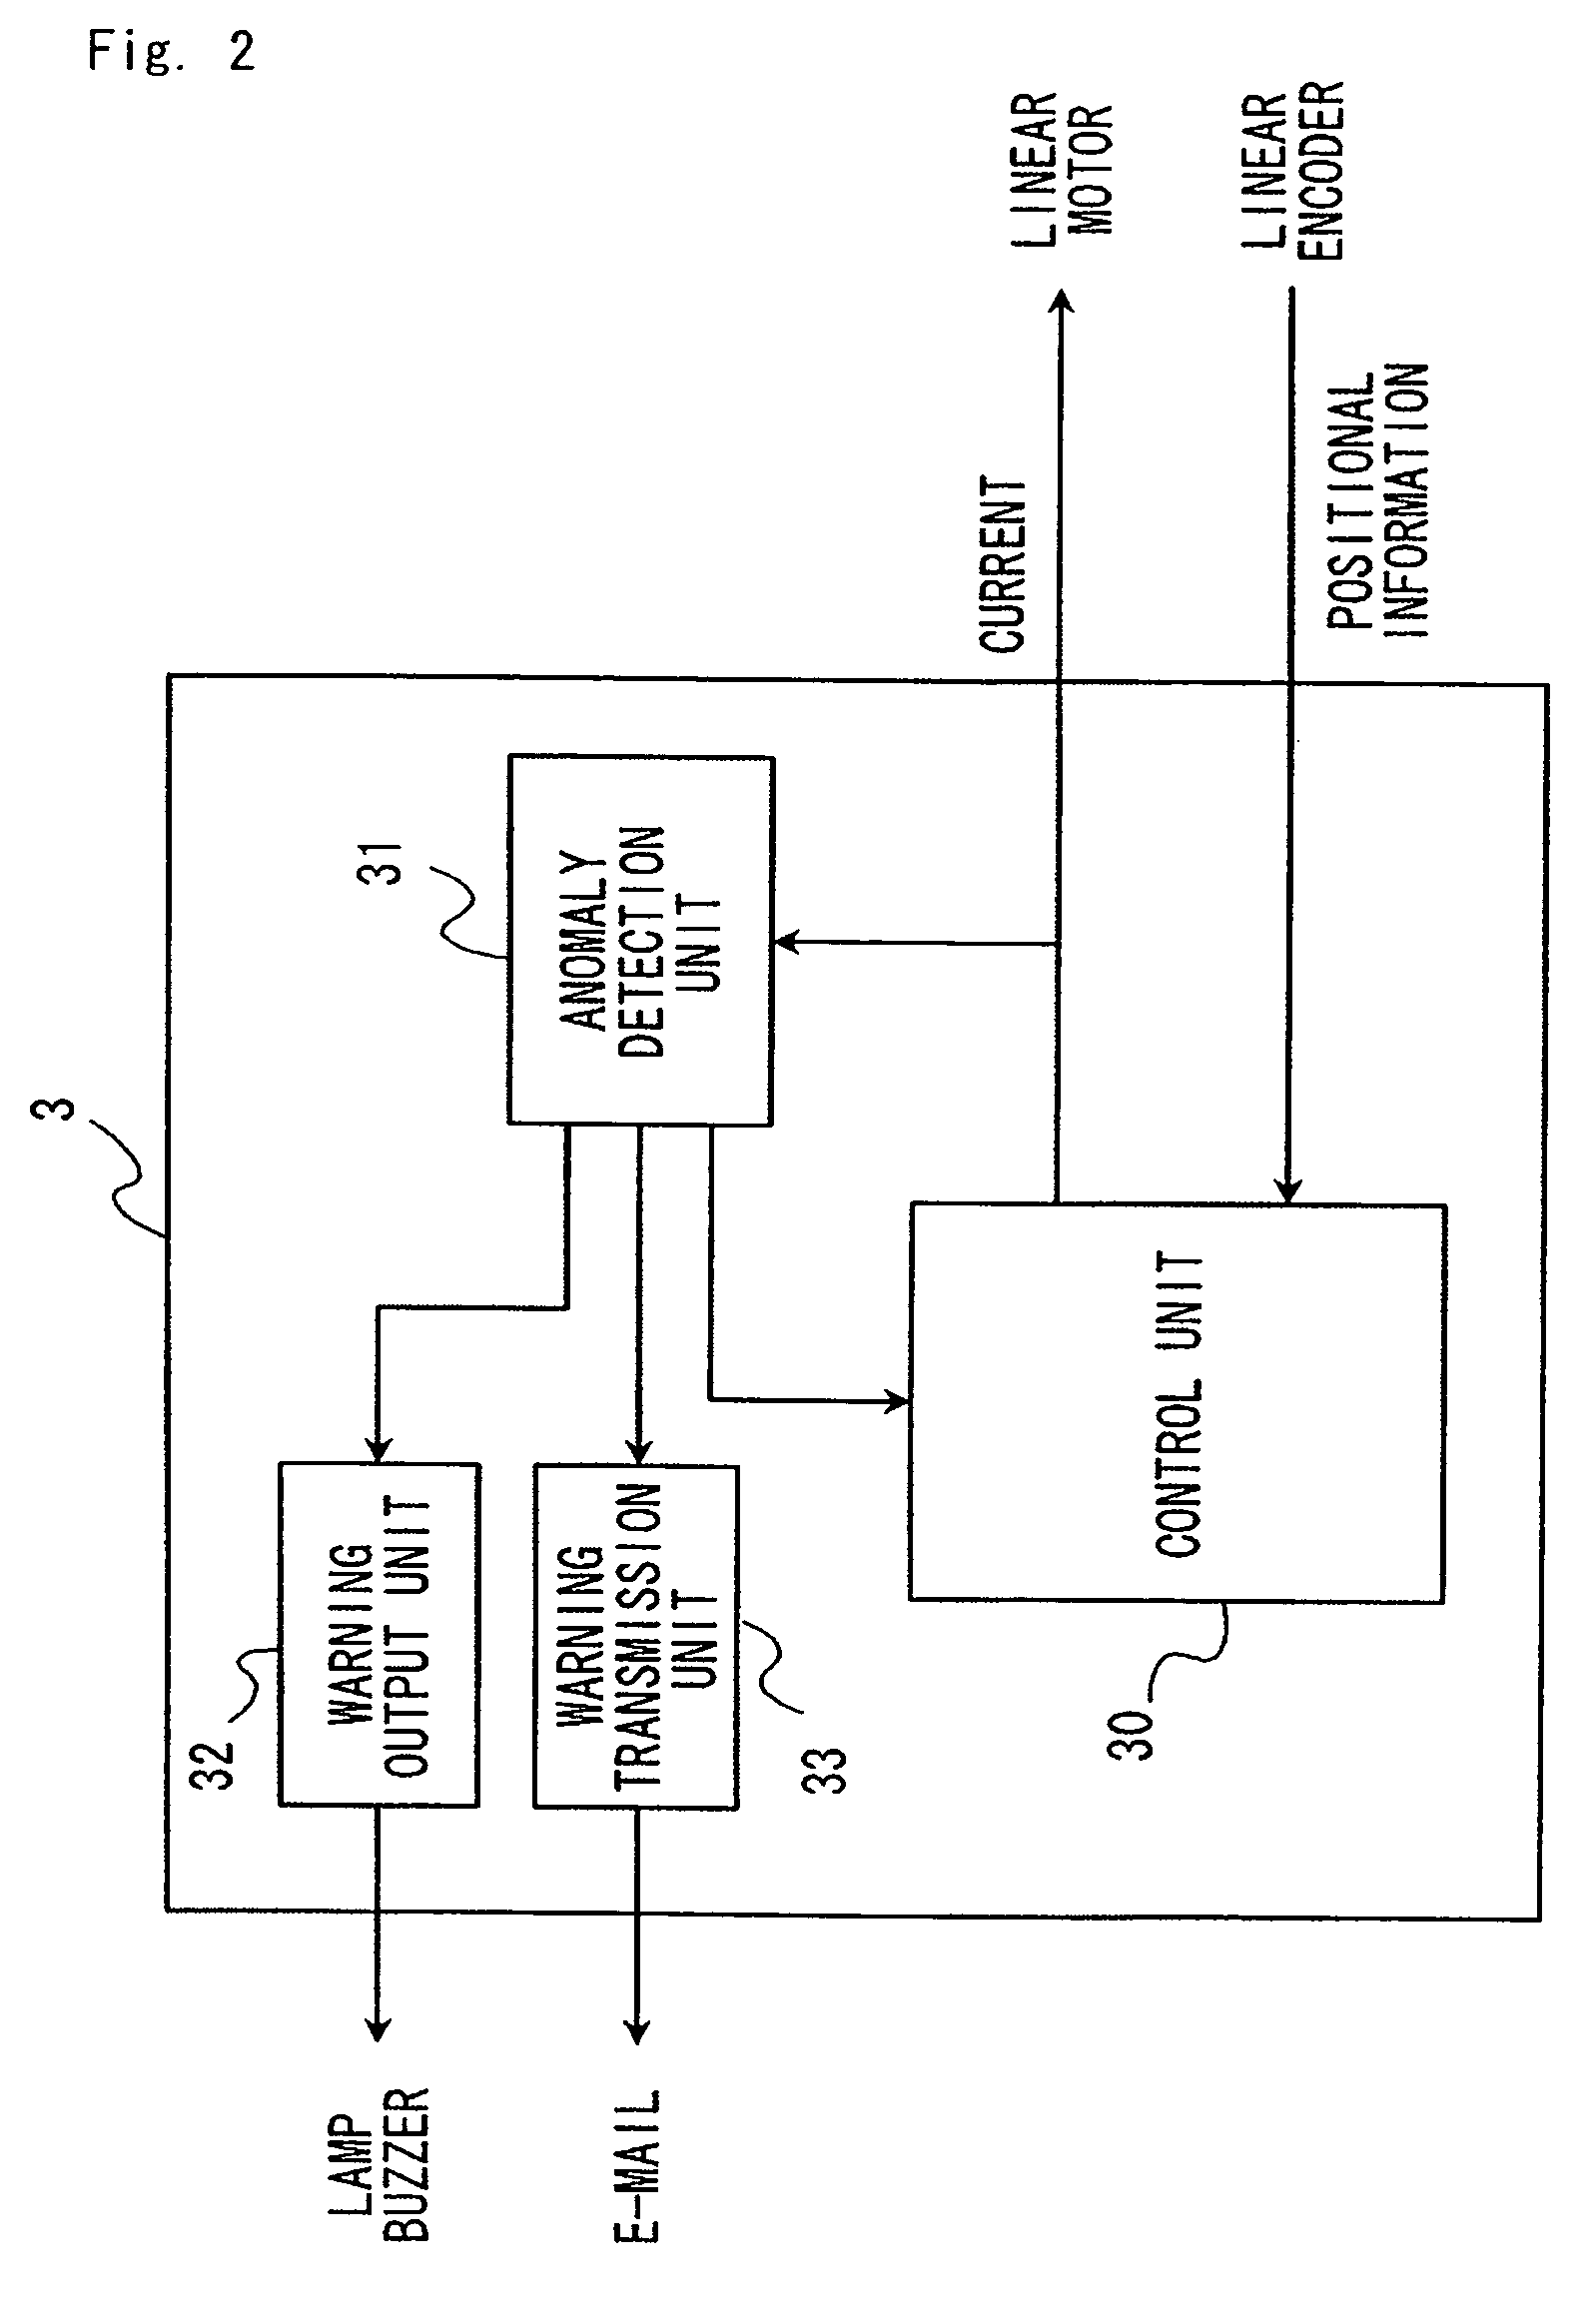 Anomaly detection method and motor control device